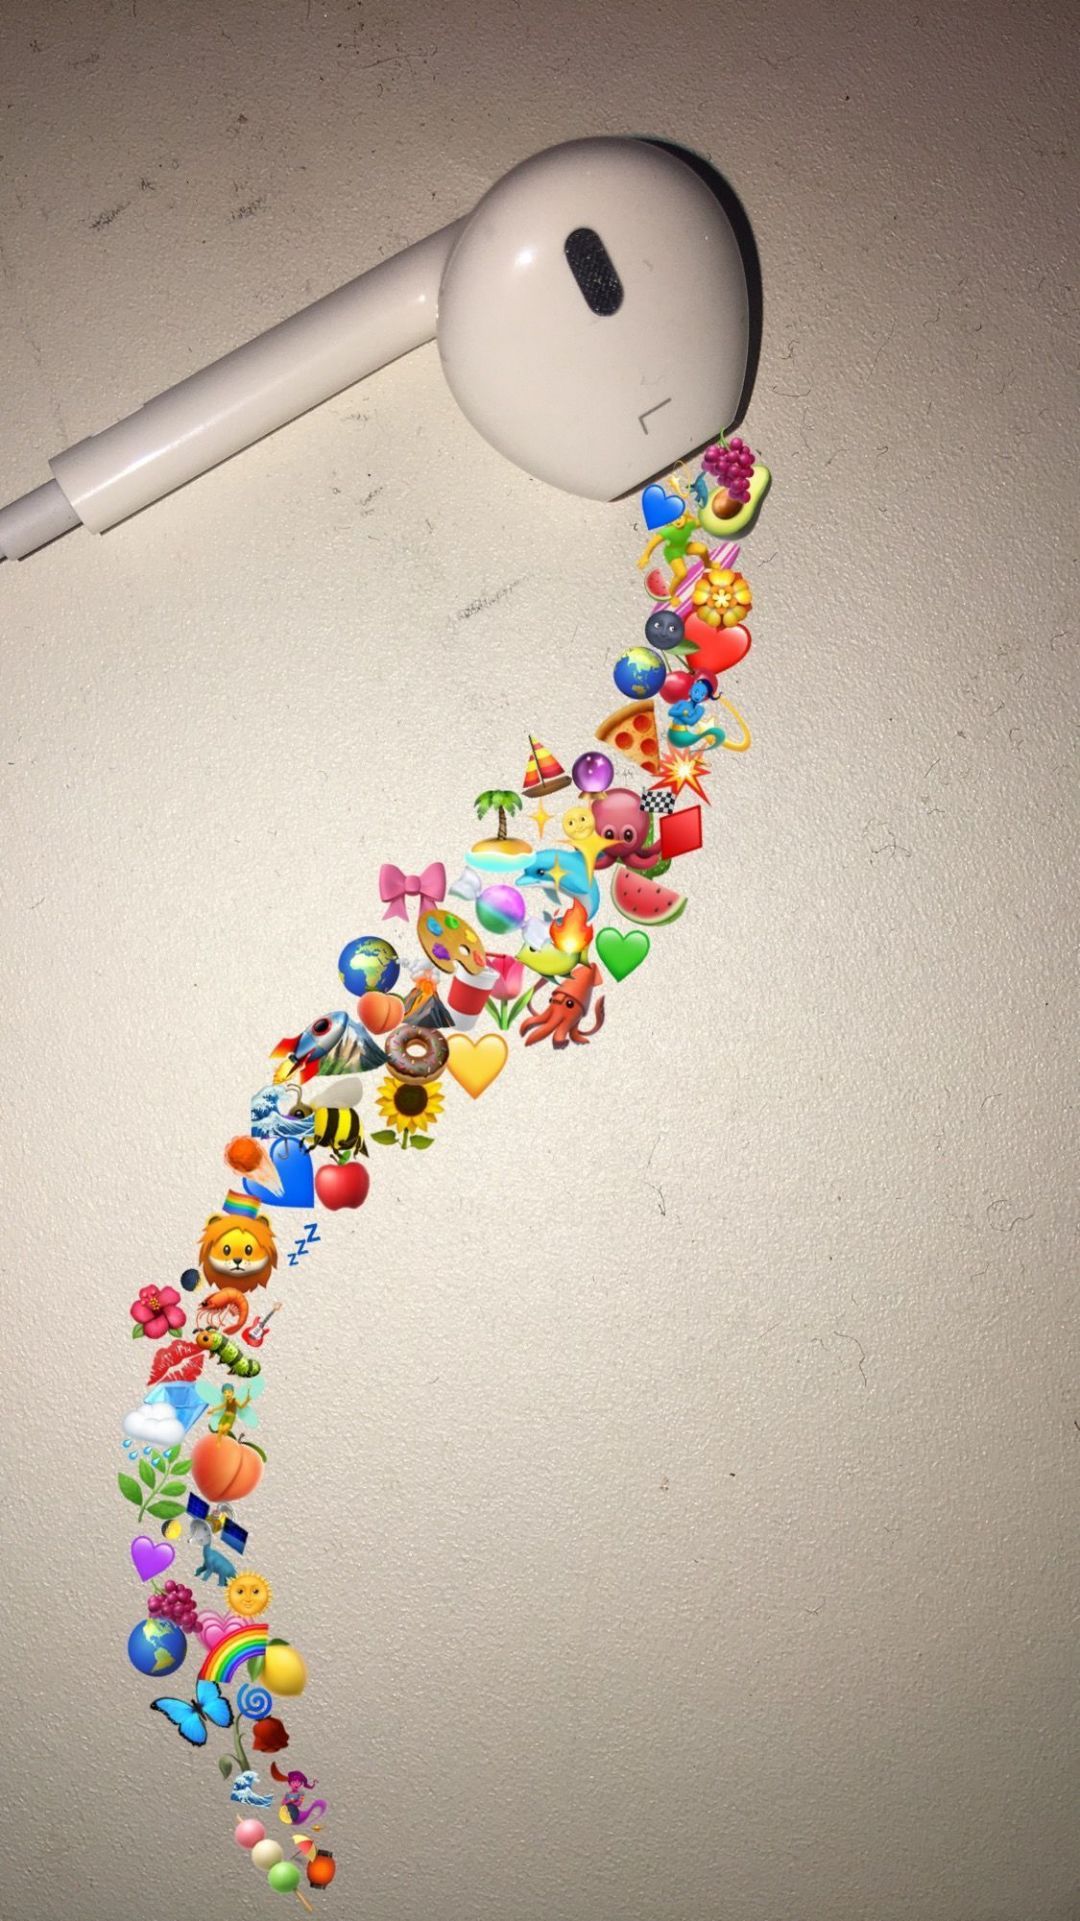 An iPhone headset with colorful stickers on it. - Emoji